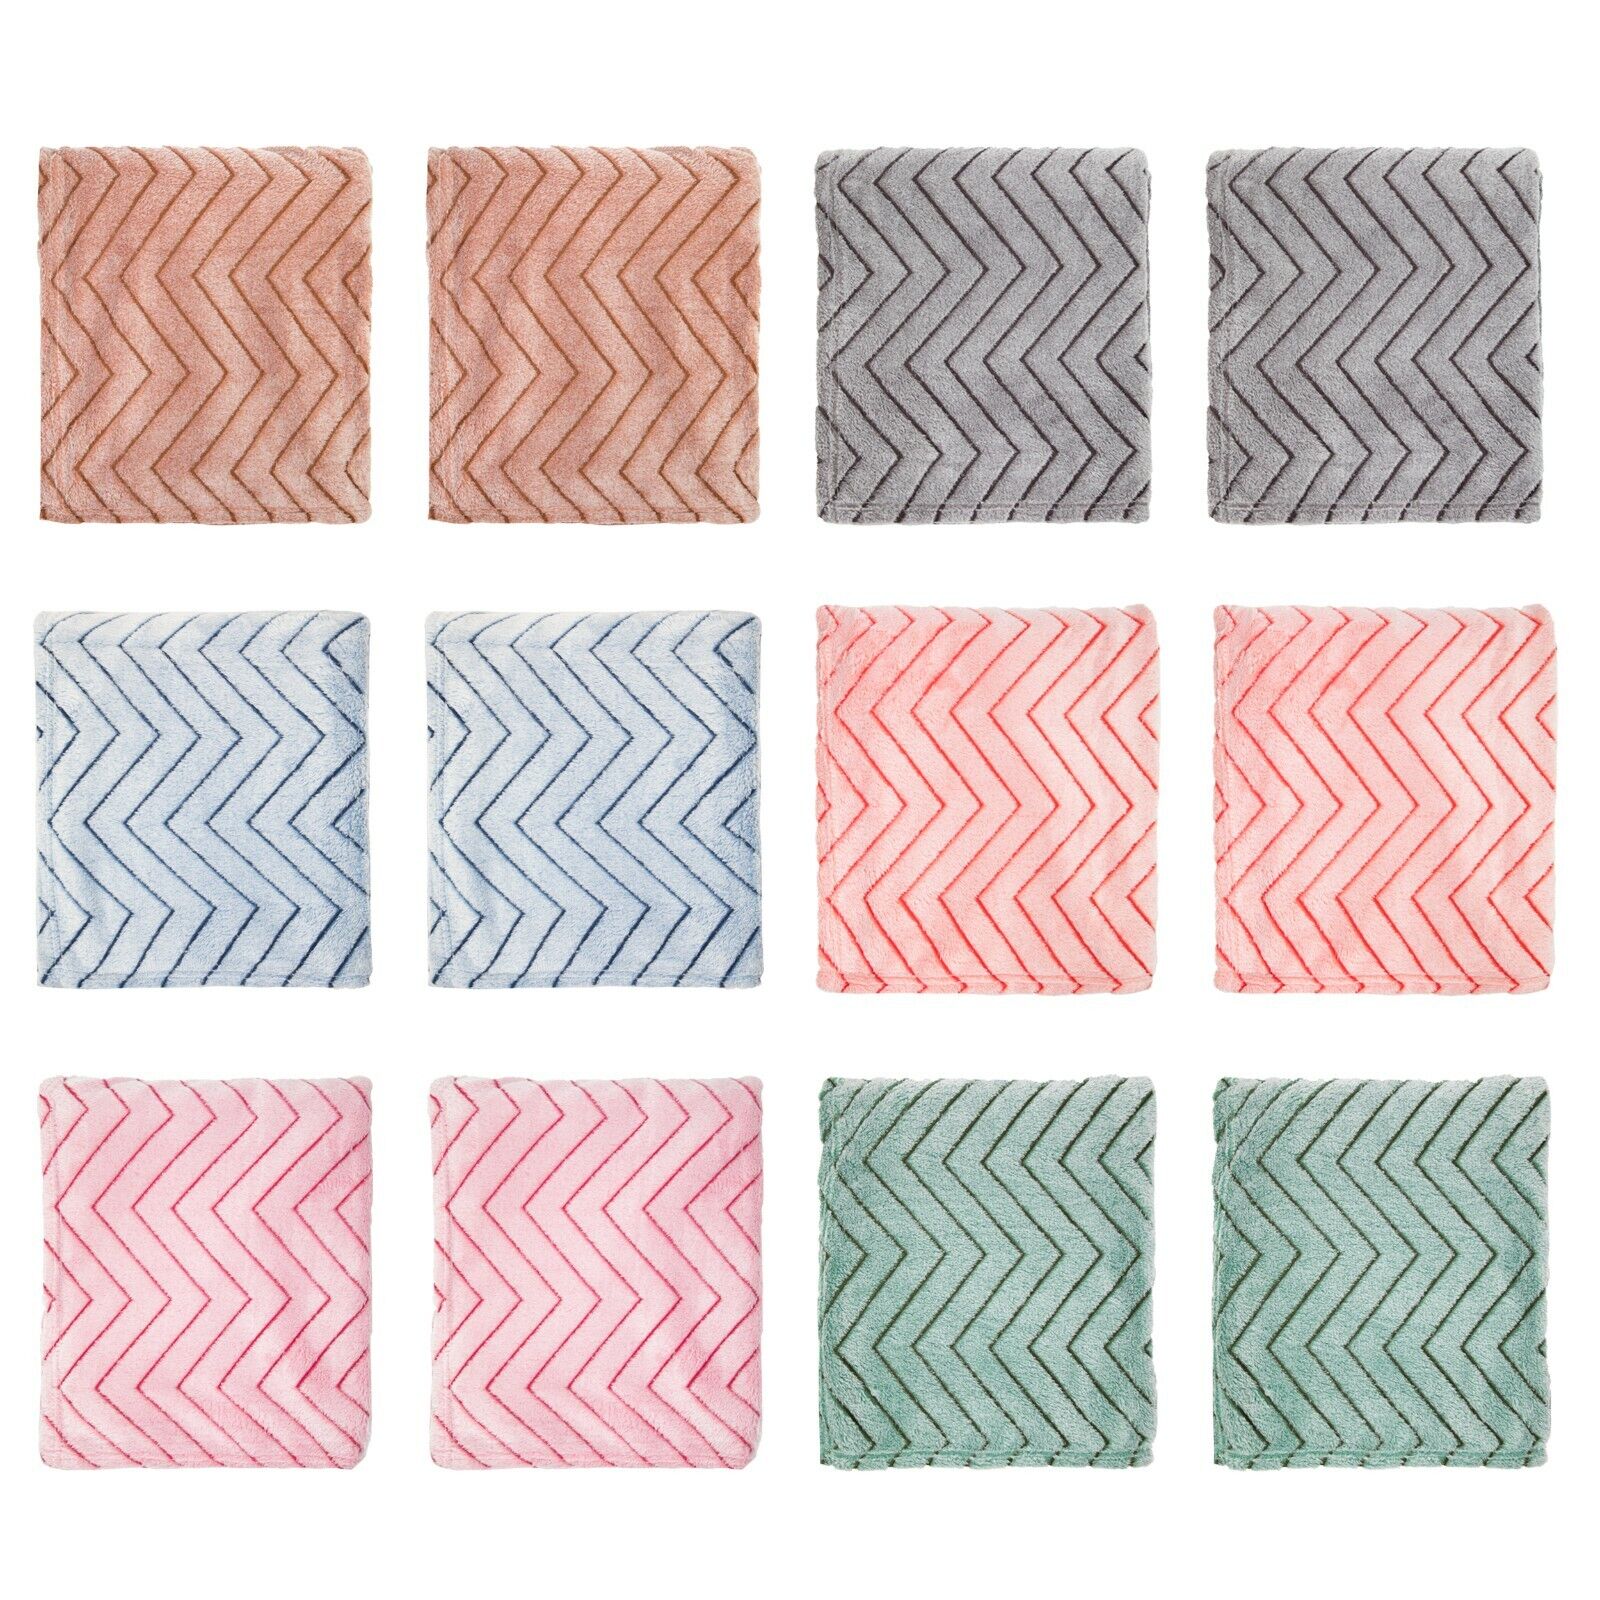 12 Pack of Chevron Fleece Throw Blankets, 50x60 Assorted Colors, Zig Zag Pattern Arkwright Does Not Apply - фотография #4